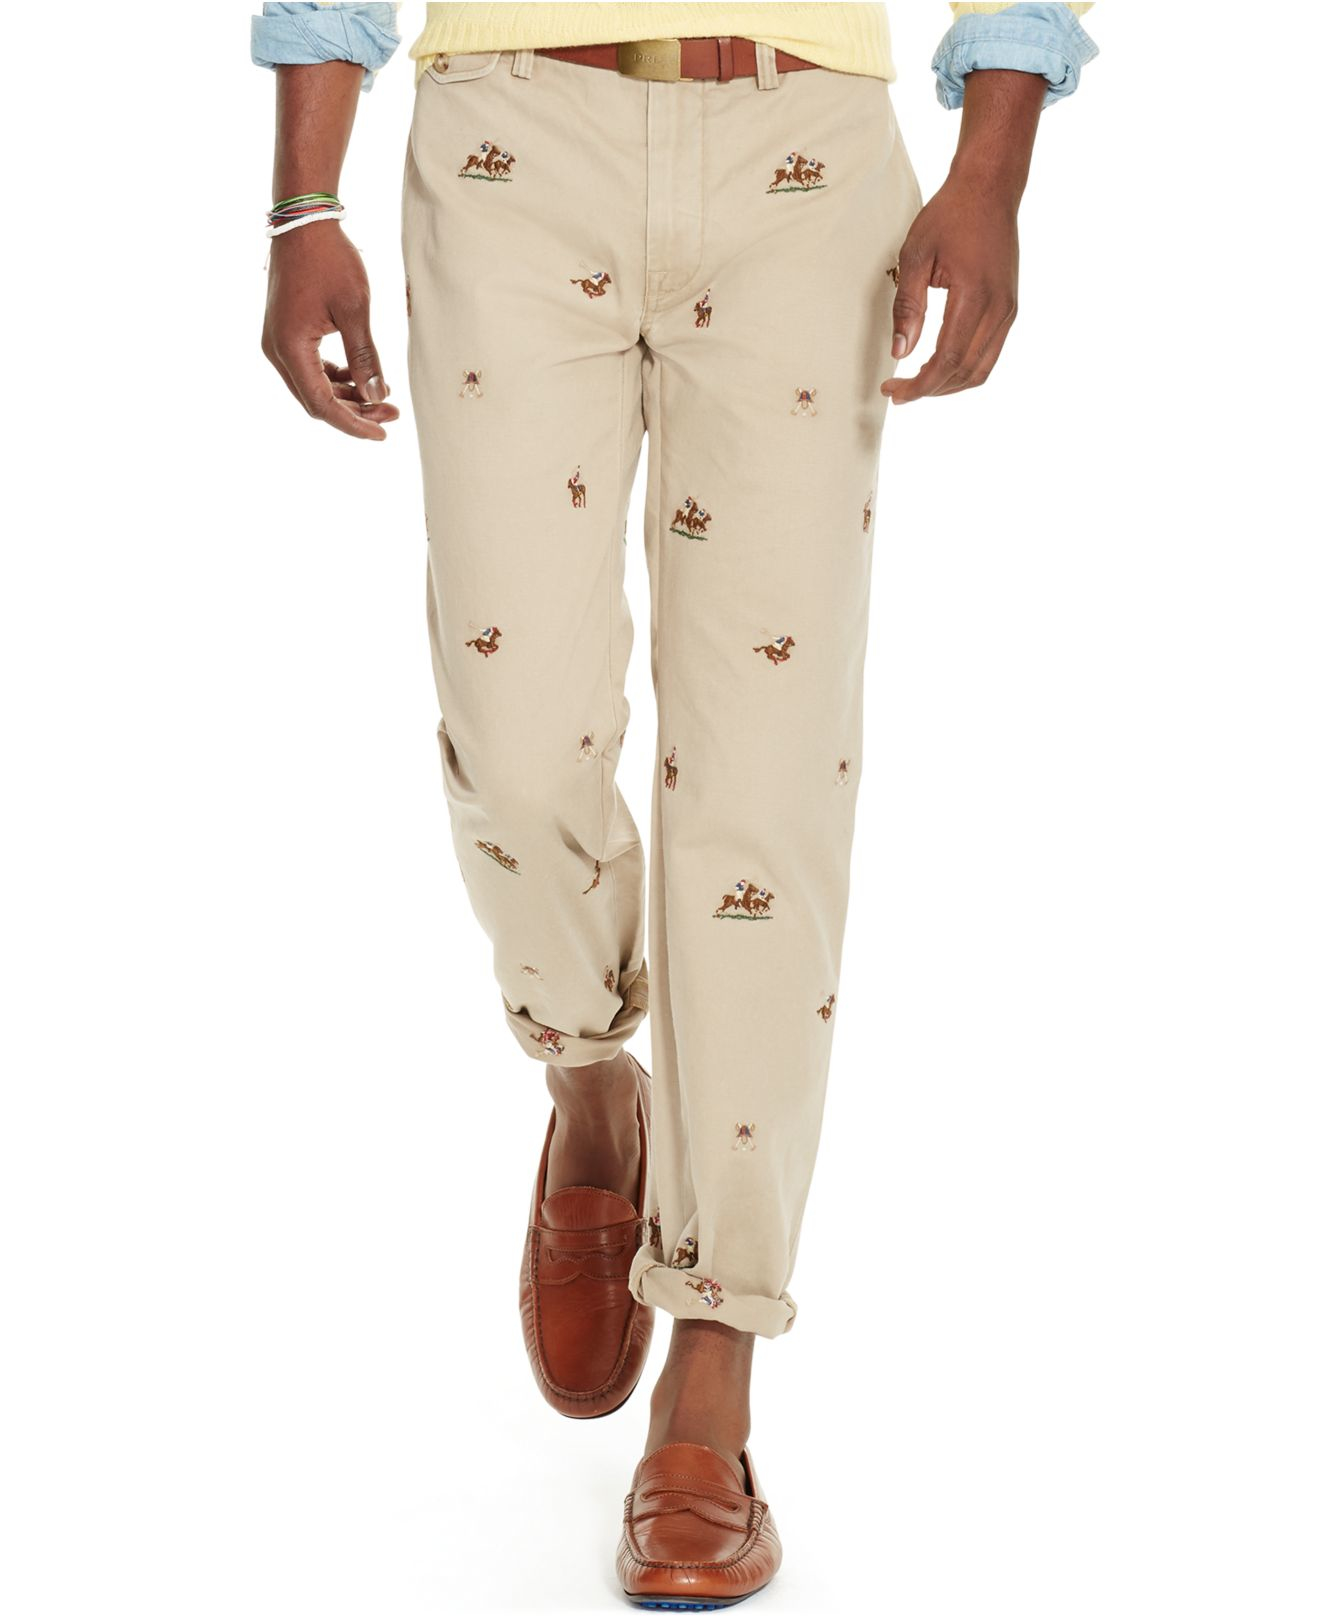 Buy > polo chino pants > in stock